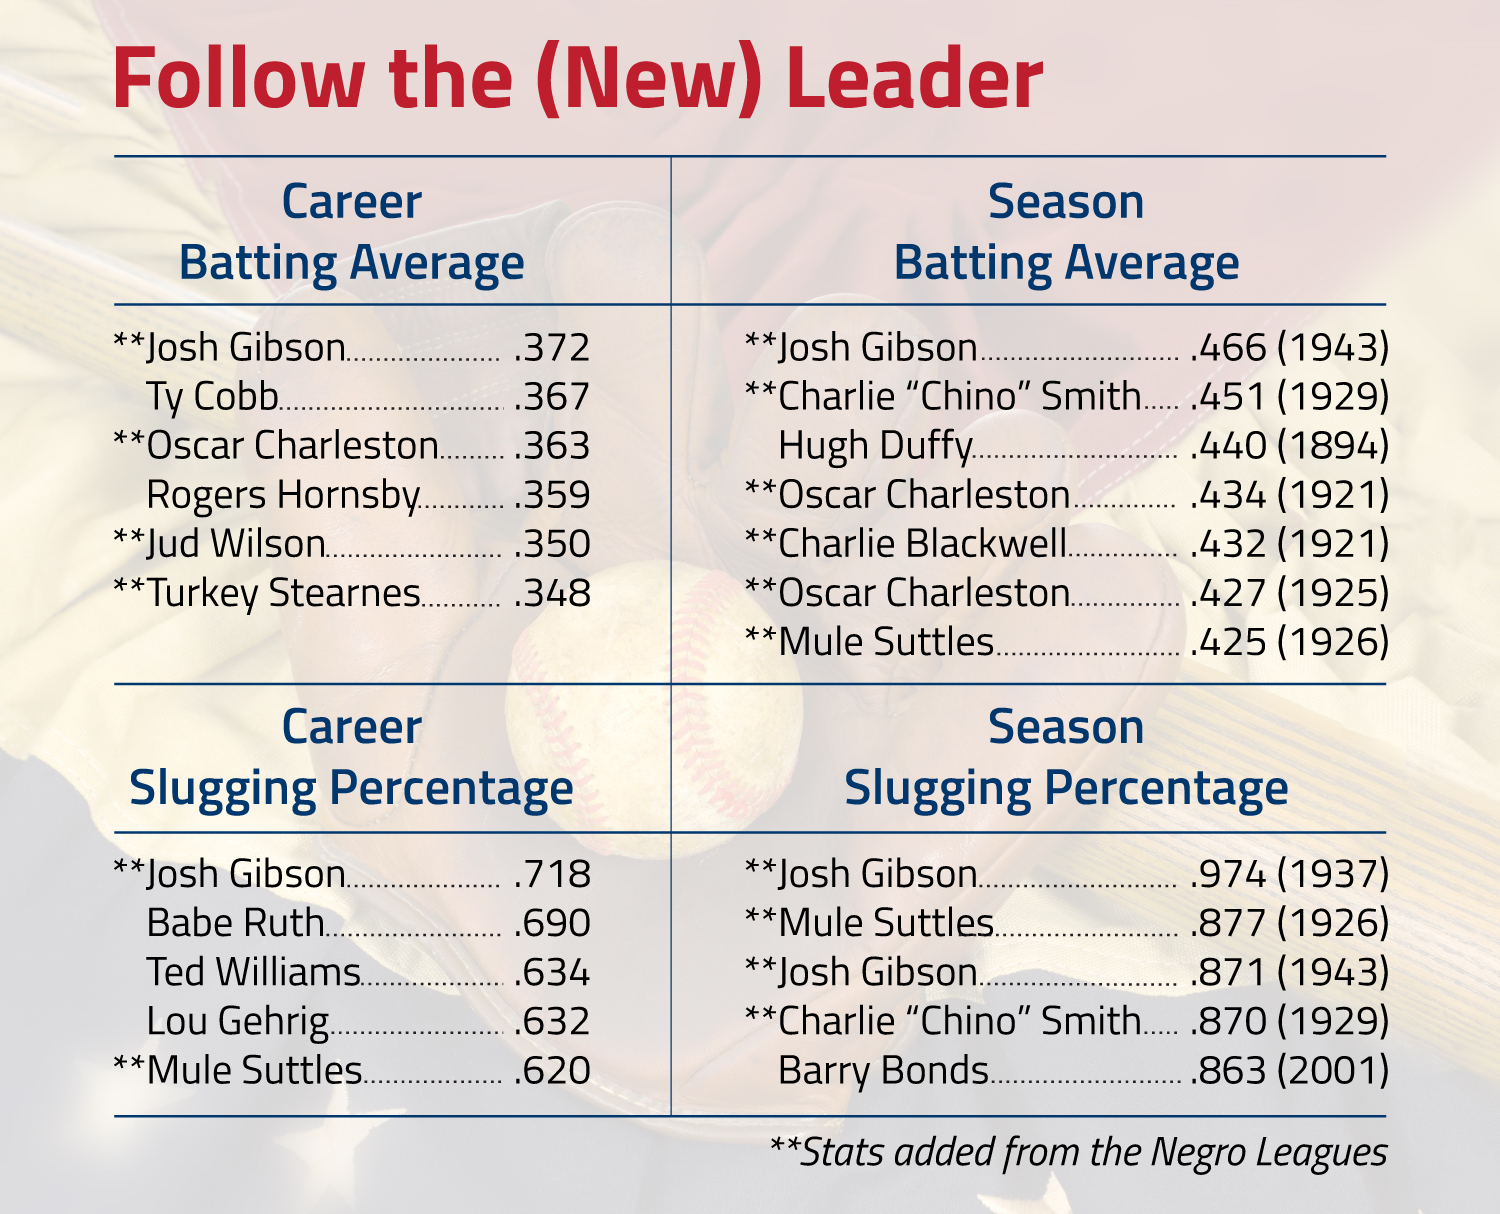 A table showing stats for career batting average, season batting average, career slugging percentage, and season slugging percentage with Gibson at the top of all lists.